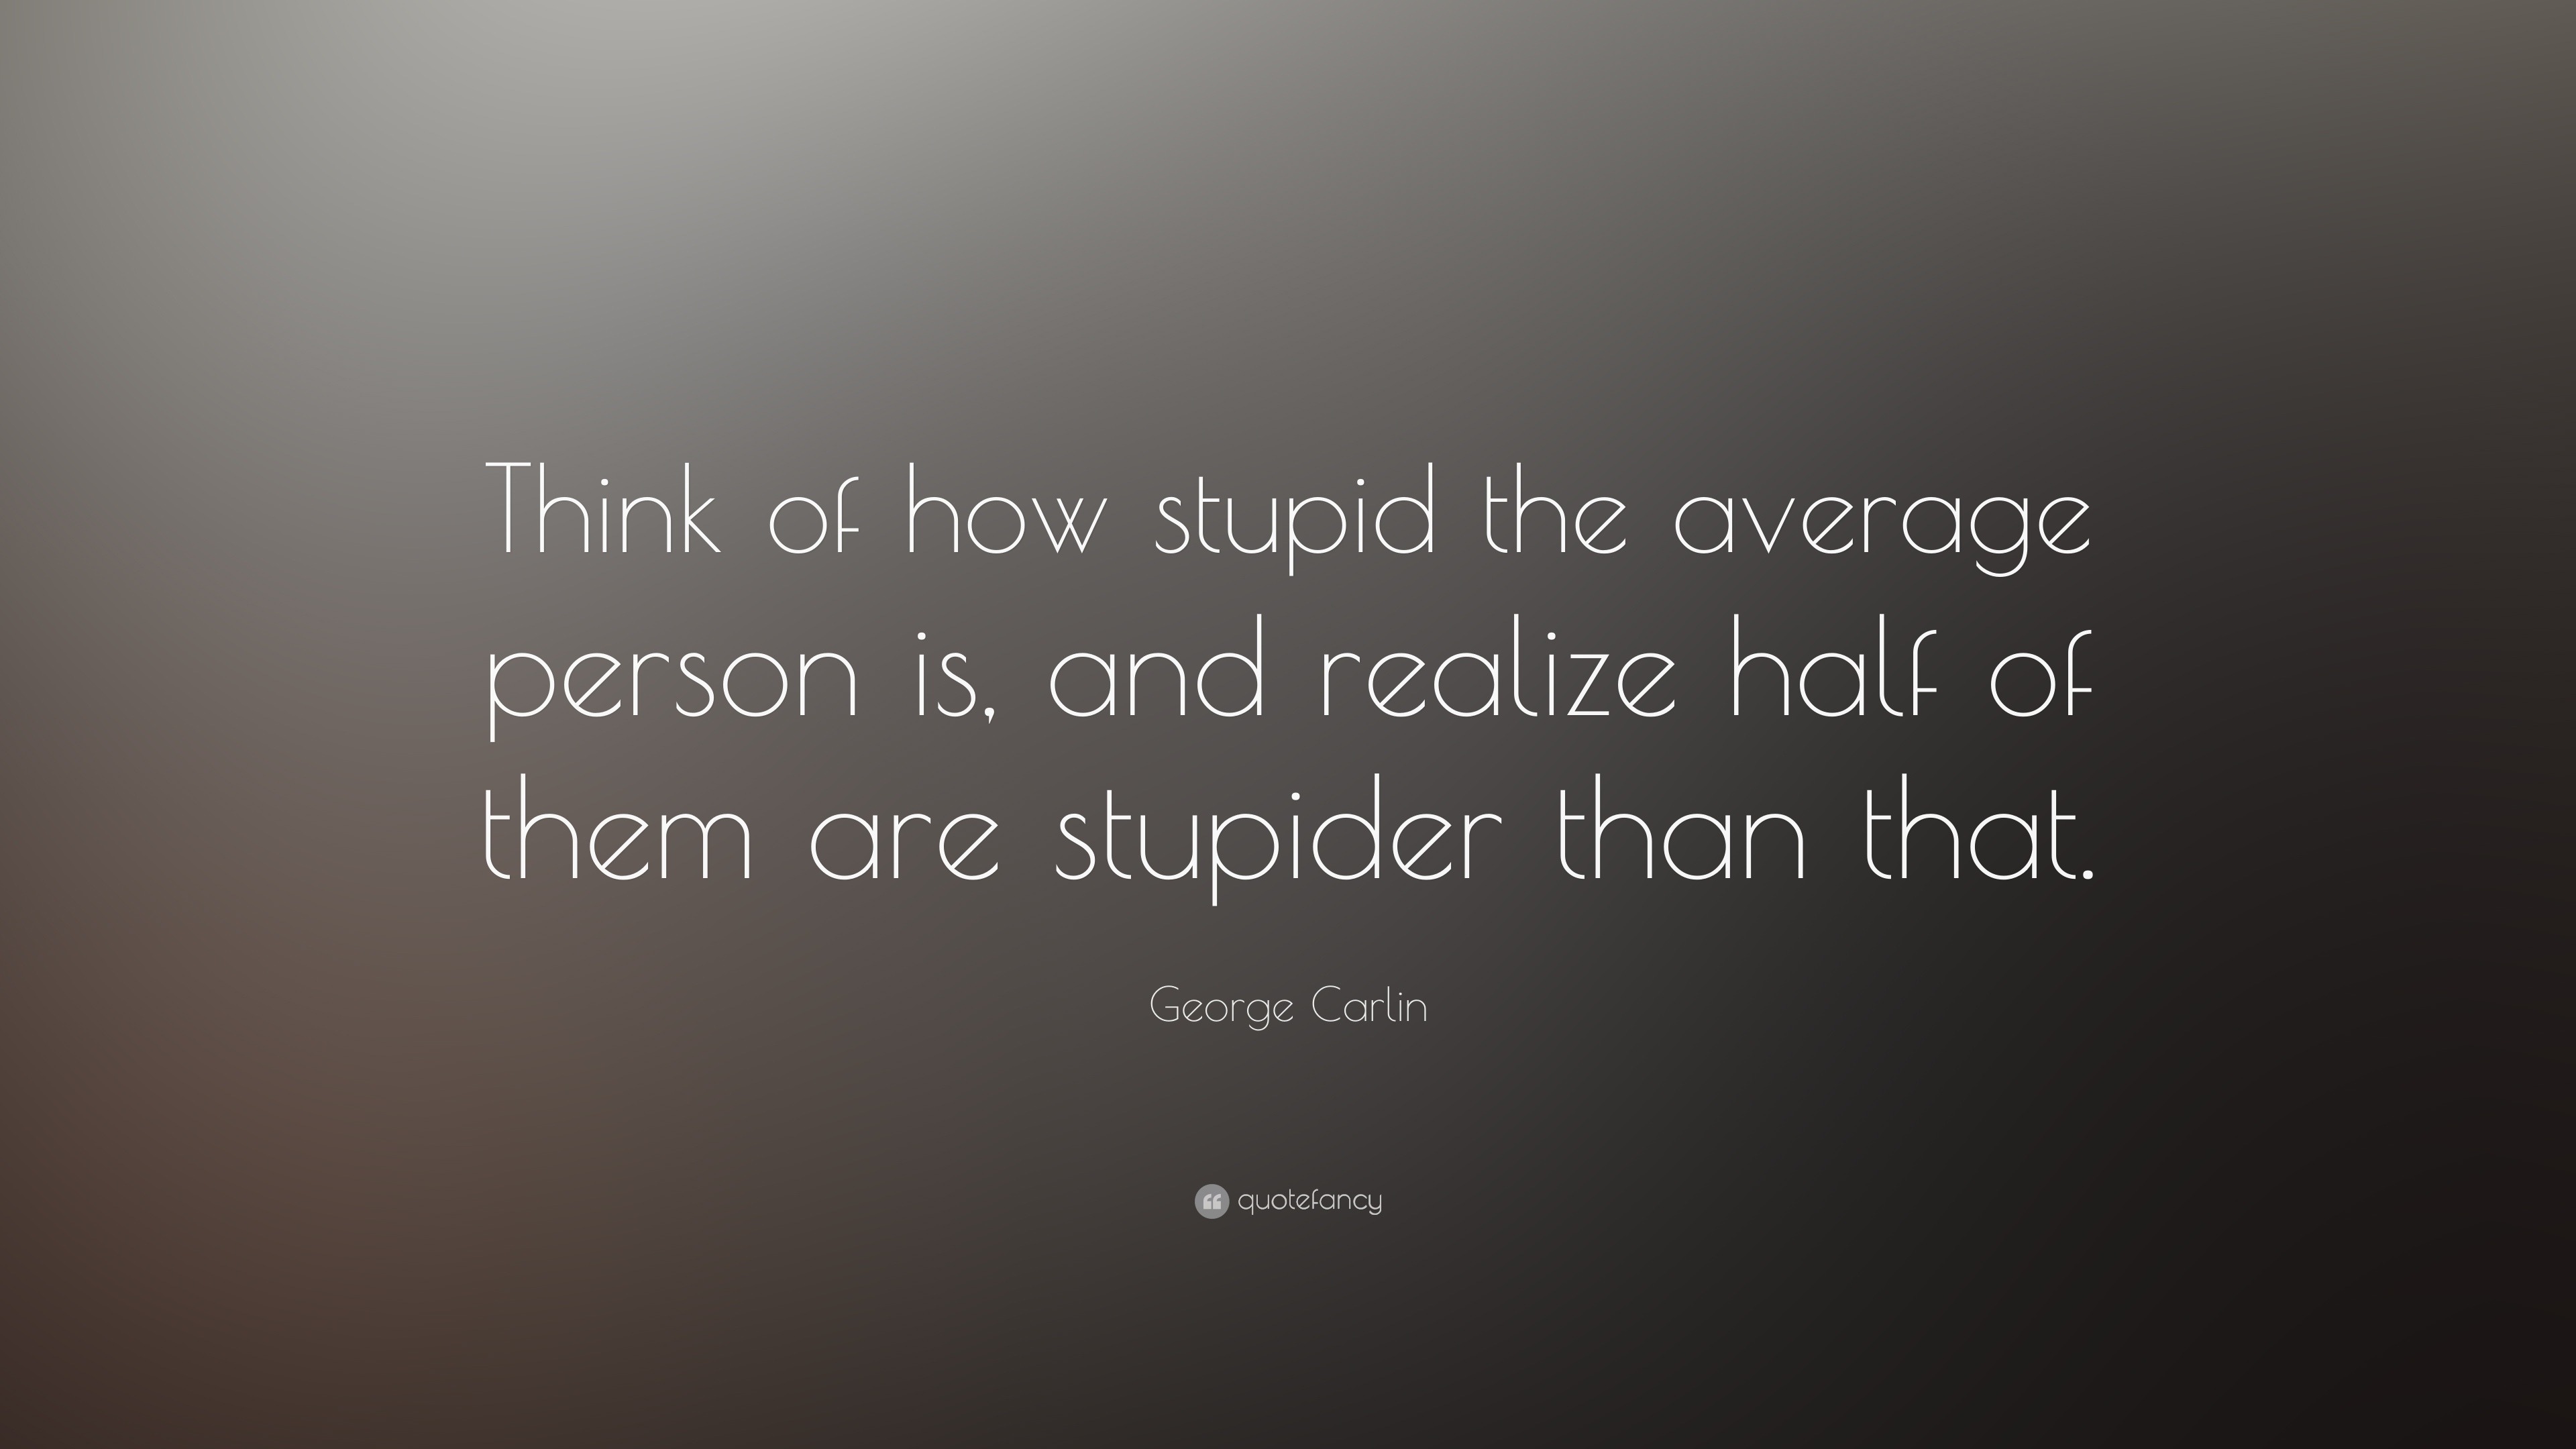 8795-George-Carlin-Quote-Think-of-how-stupid-the-average-person-is-and.jpg.